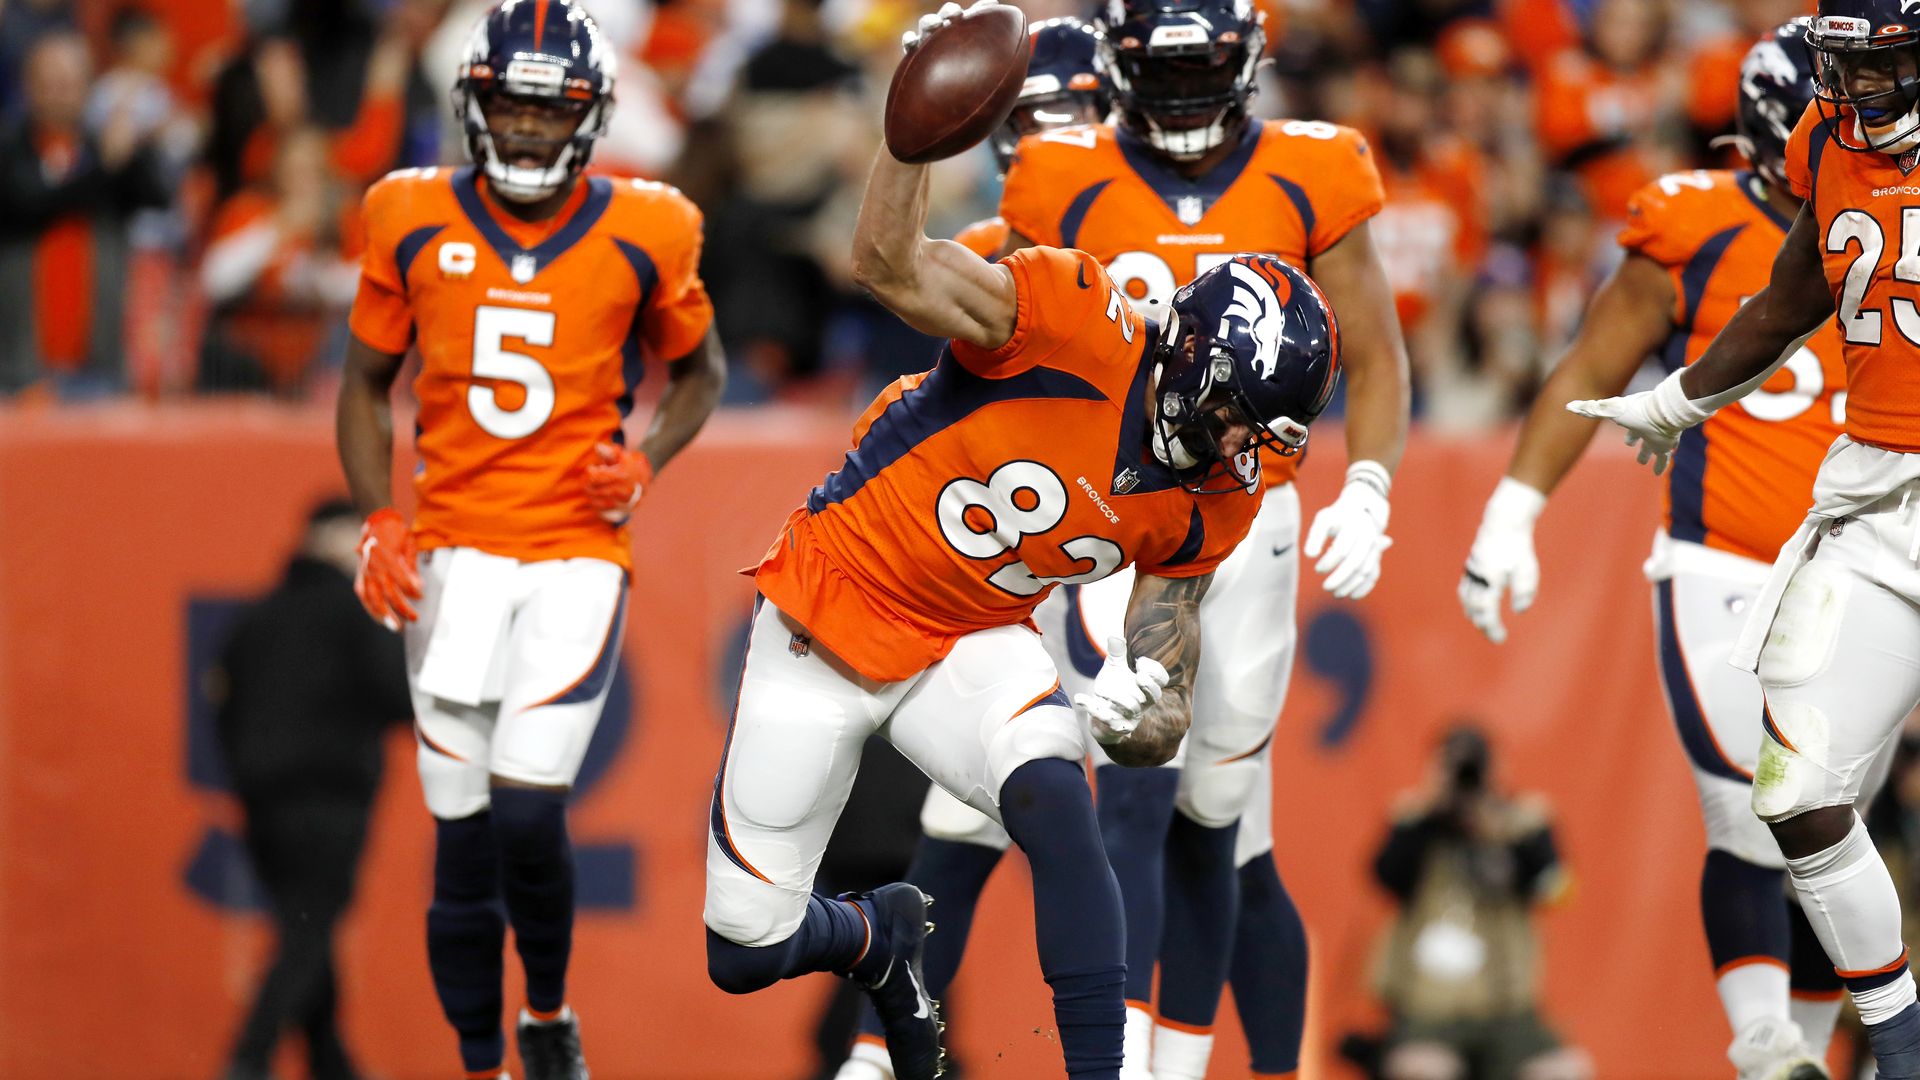  Eric Saubert of the Denver Broncos spikes the football after scoring a touchdown in the fourth quarter Sunday. Photo: Justin Edmonds/Getty Images